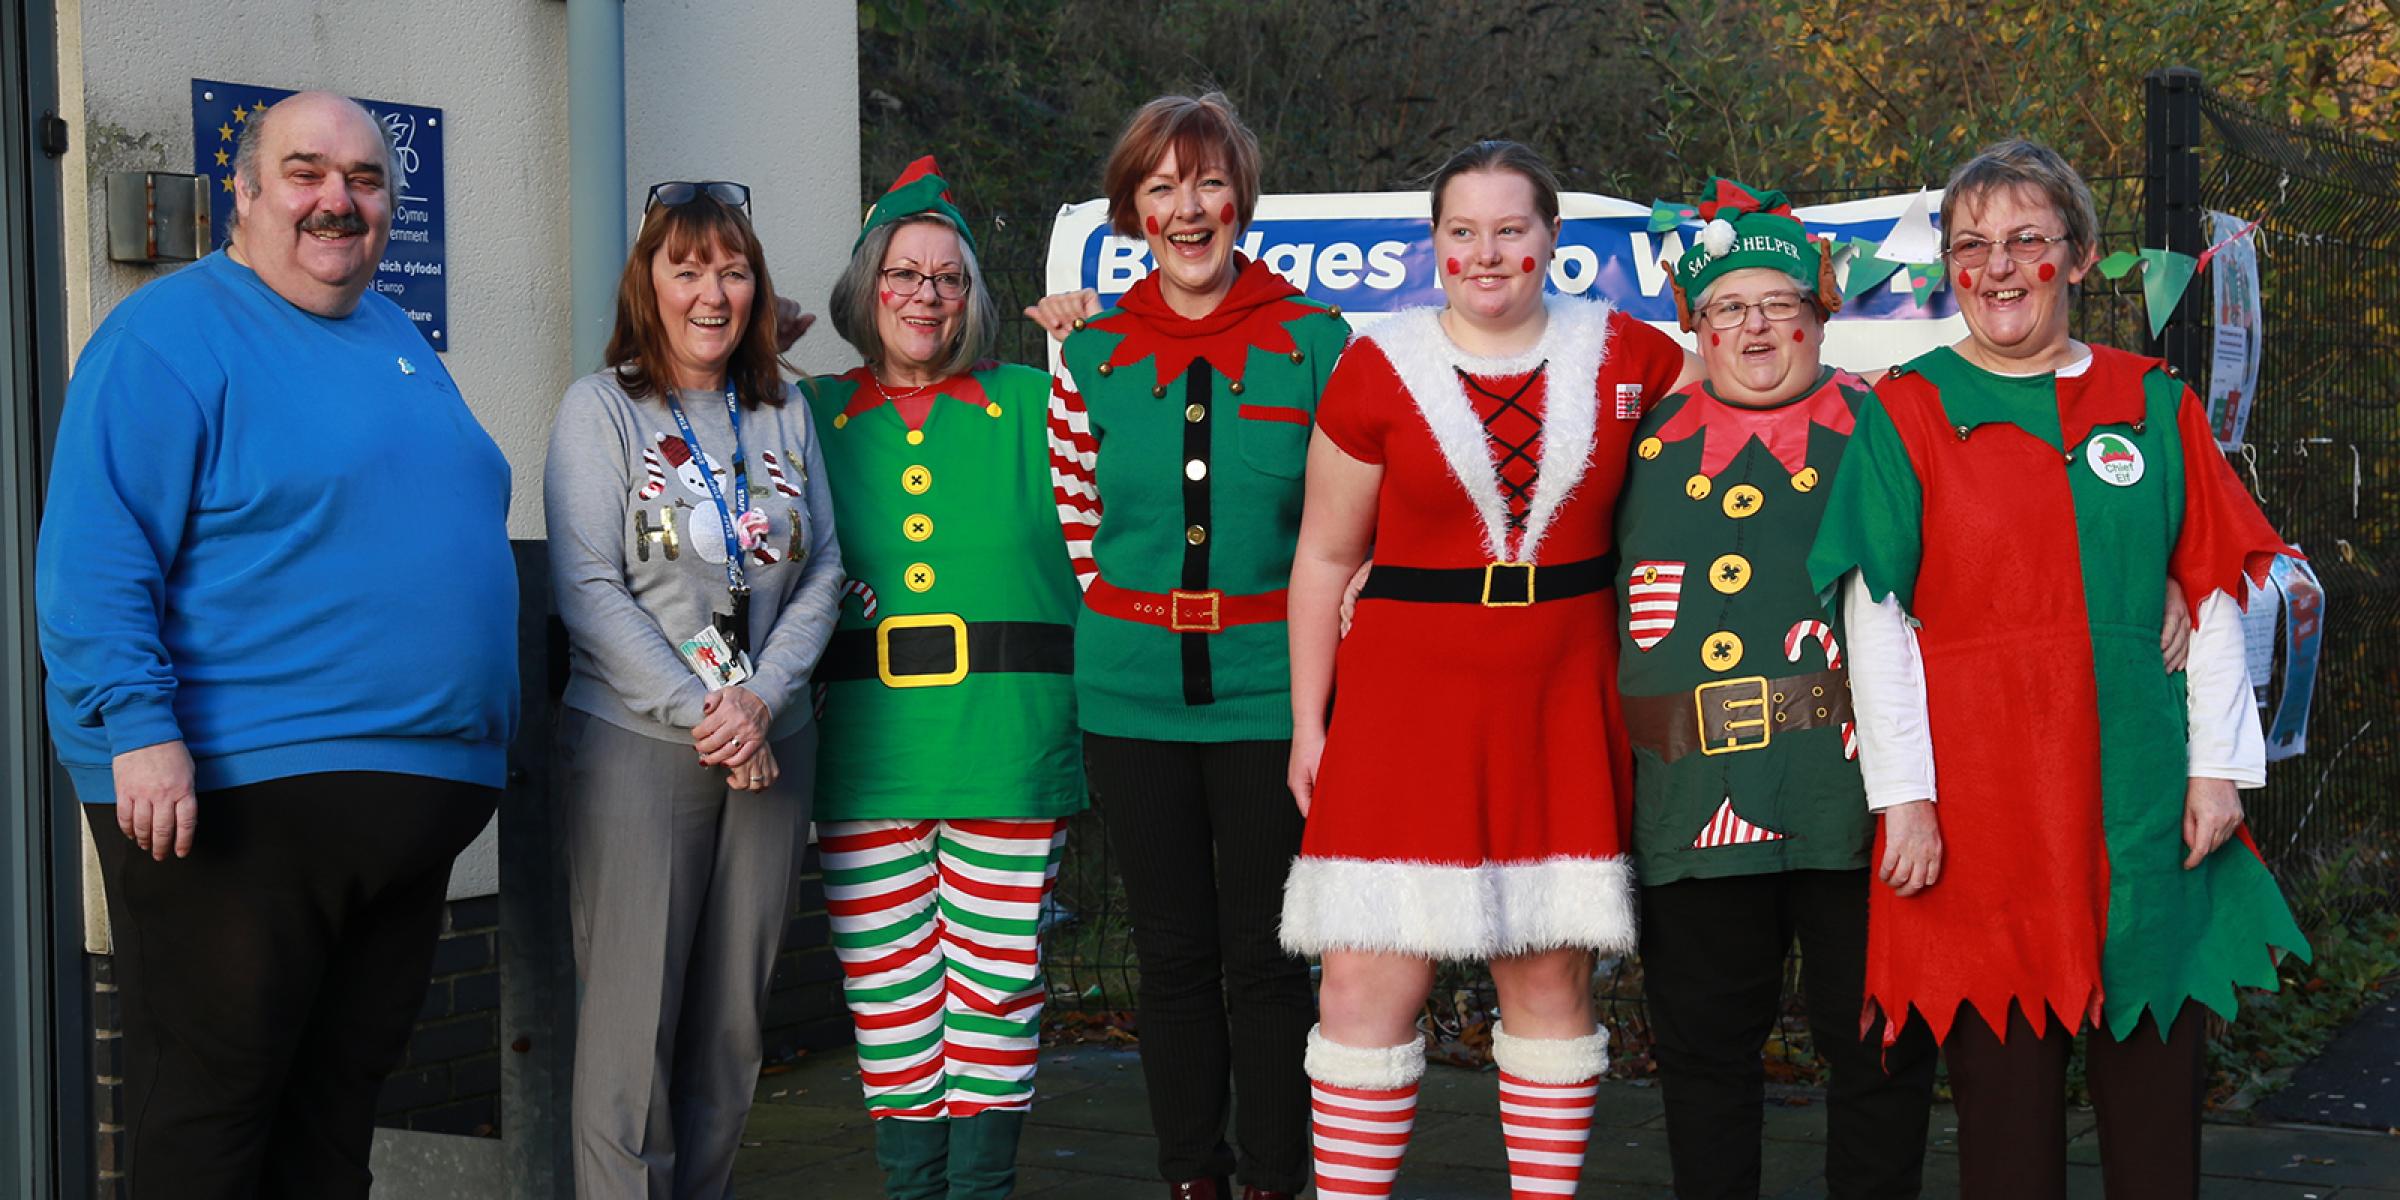 Elf Day supporters in Ebbw Vale